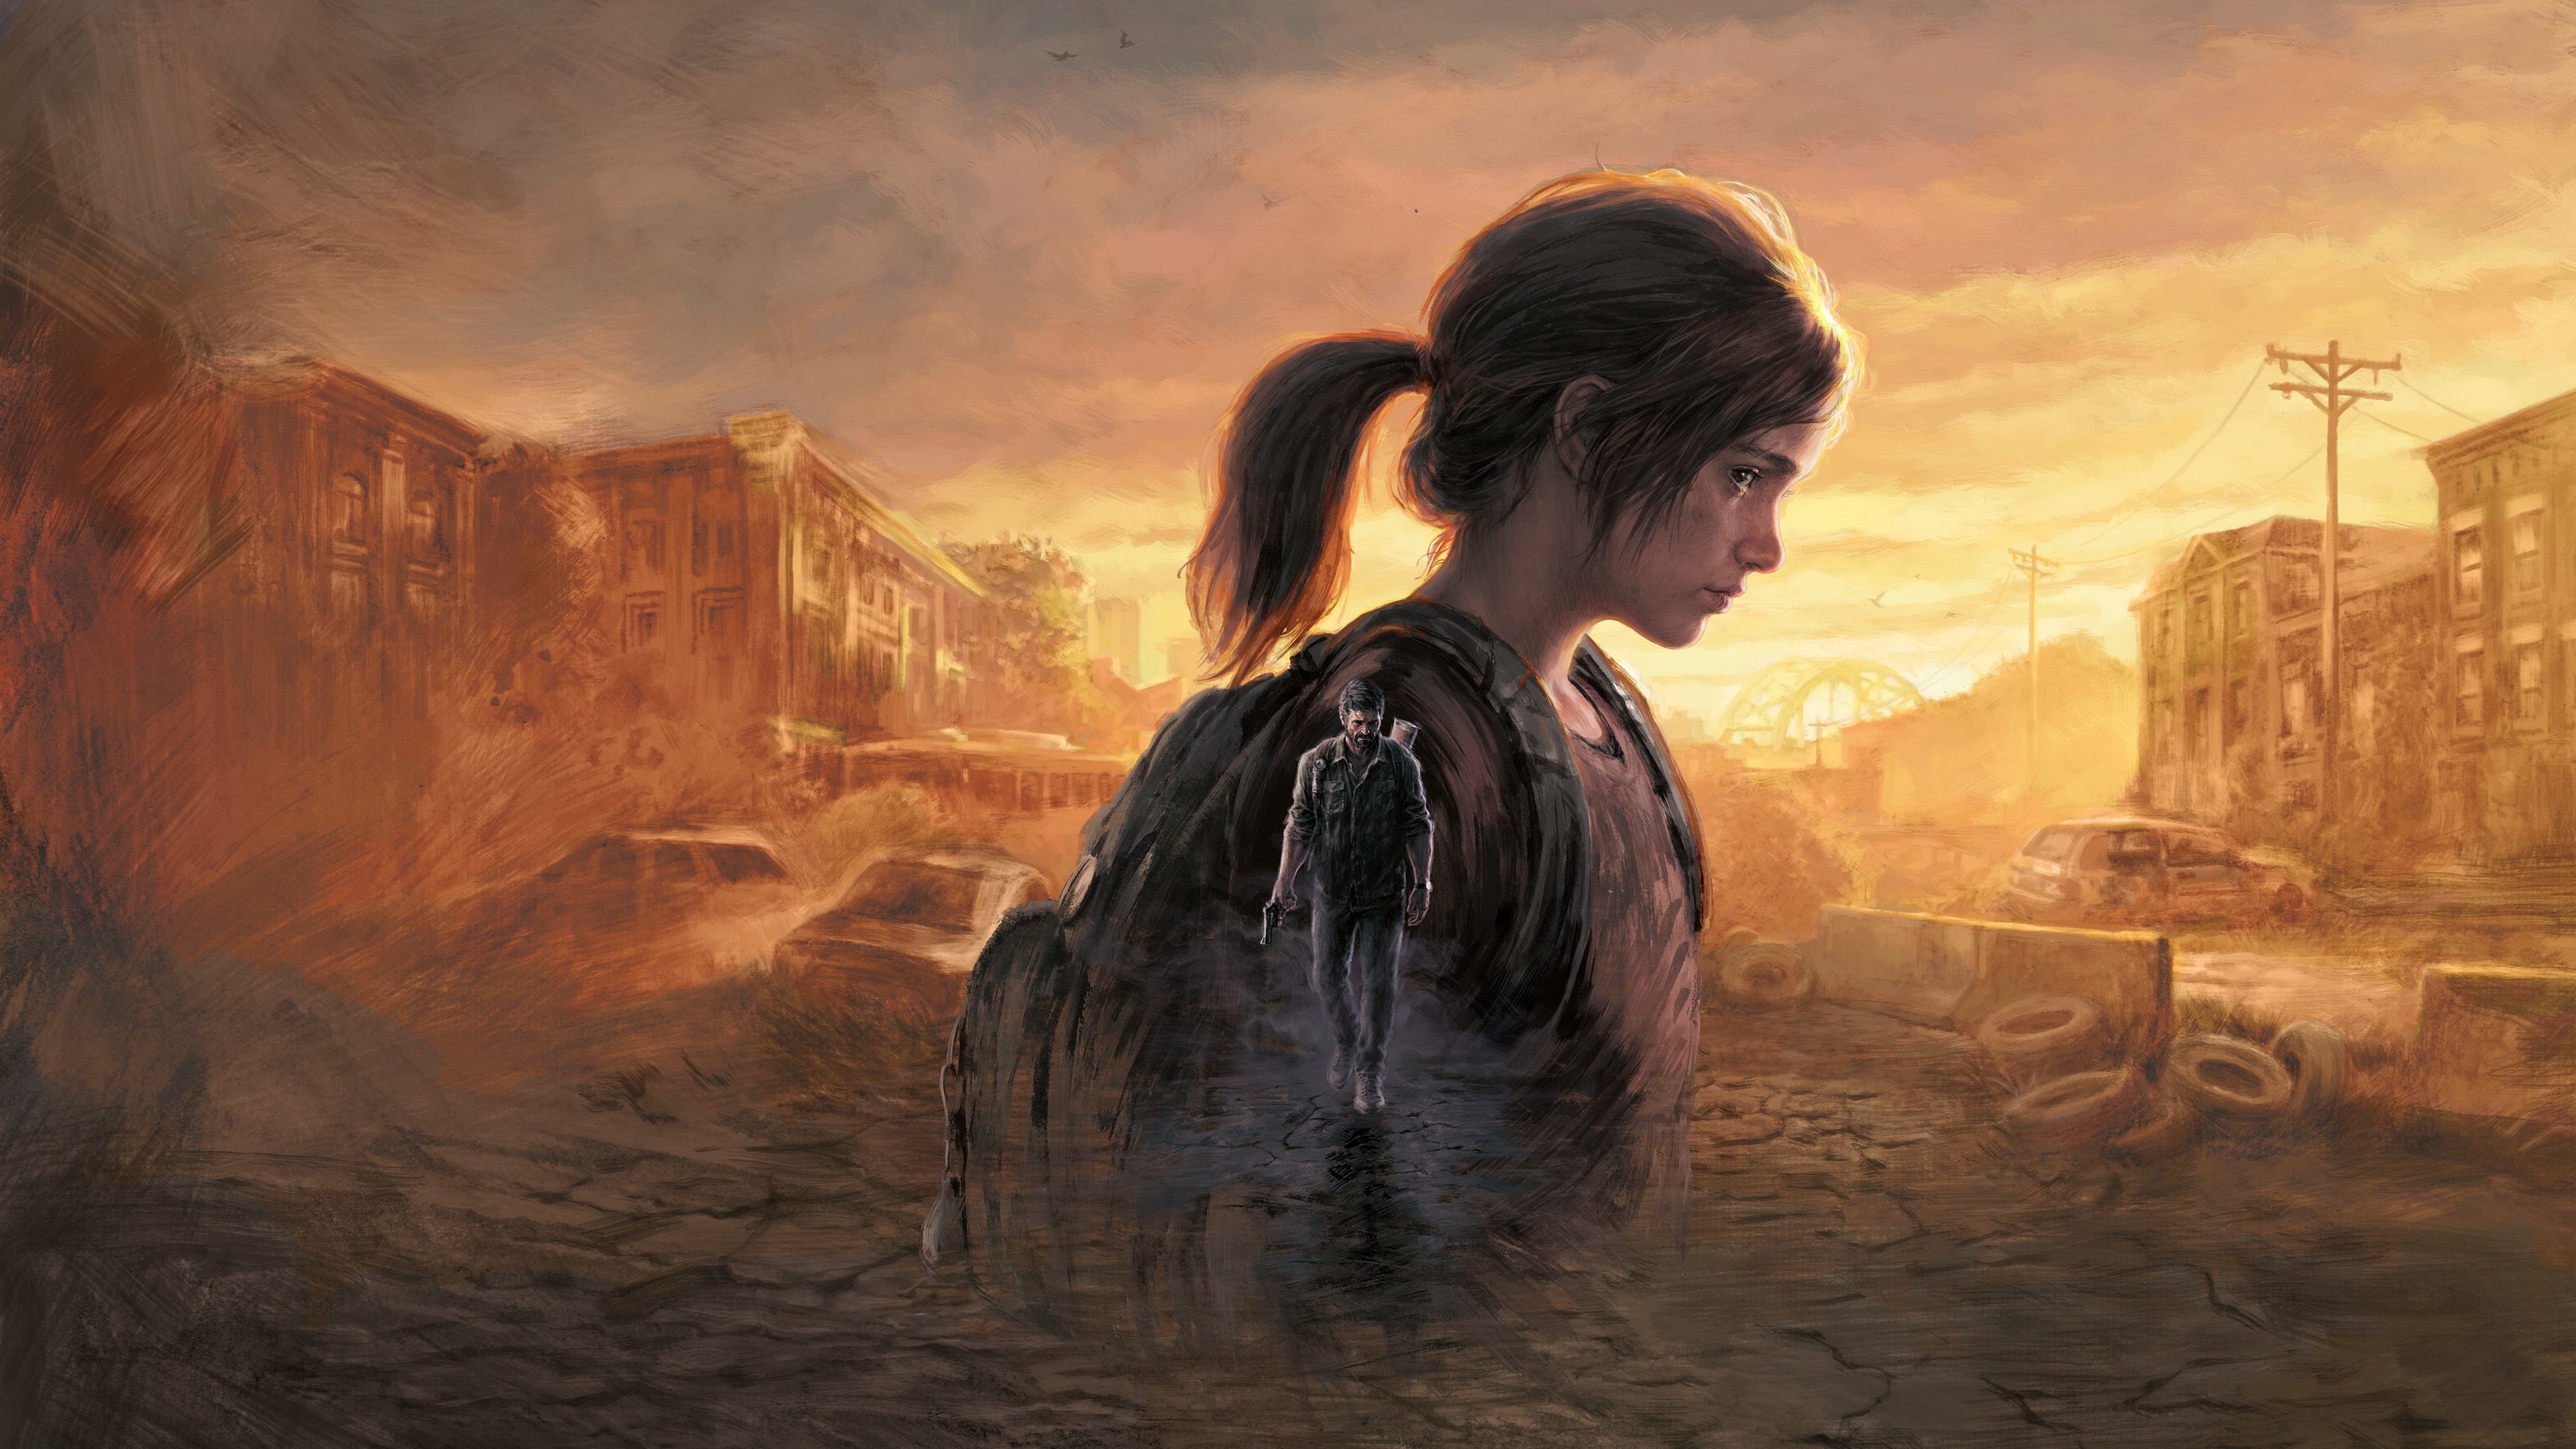 The Last of Us PC release delayed three weeks for extra polish - Dexerto